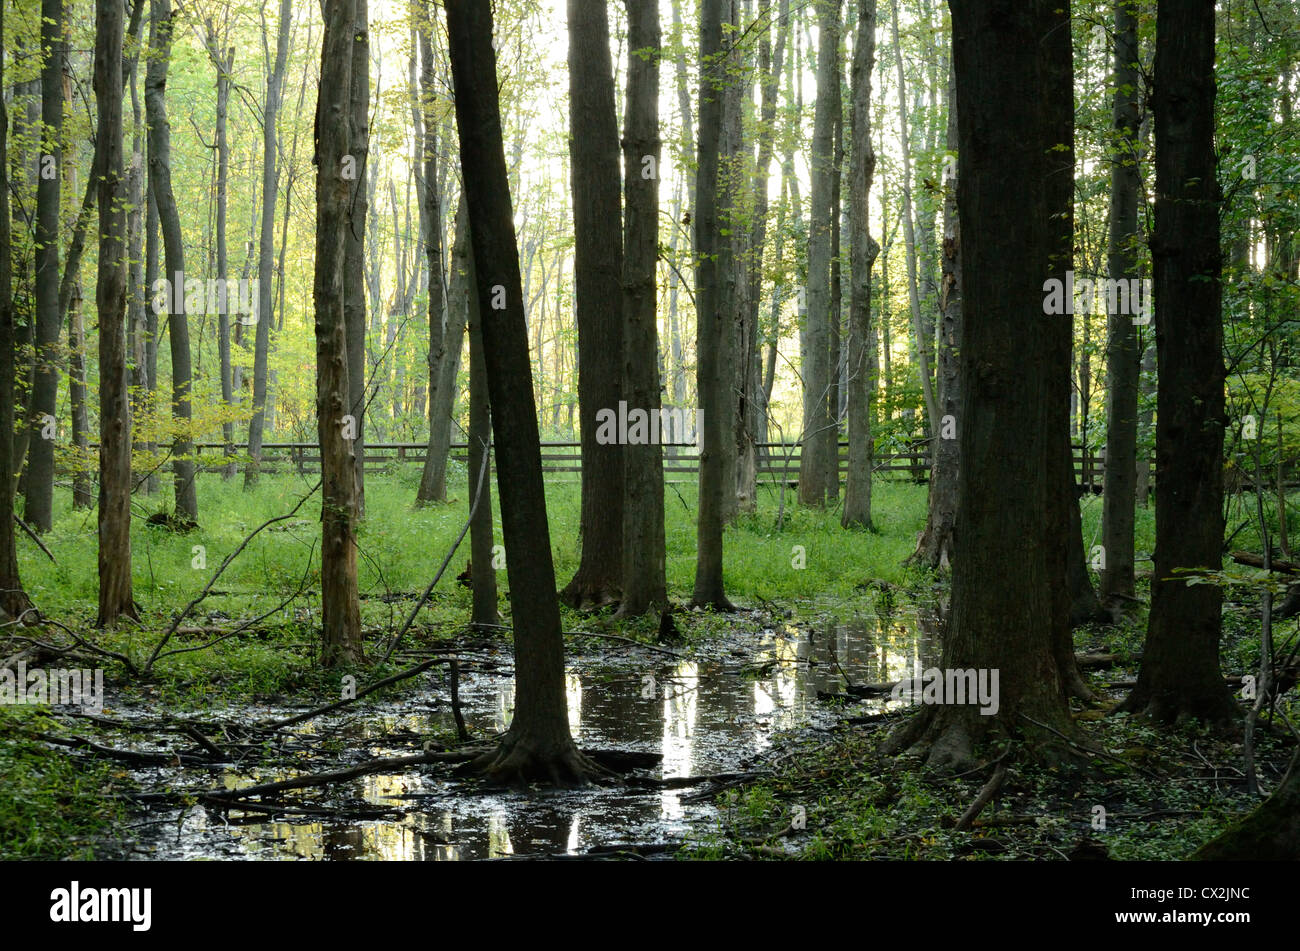 Wetland forest trees. Stock Photo